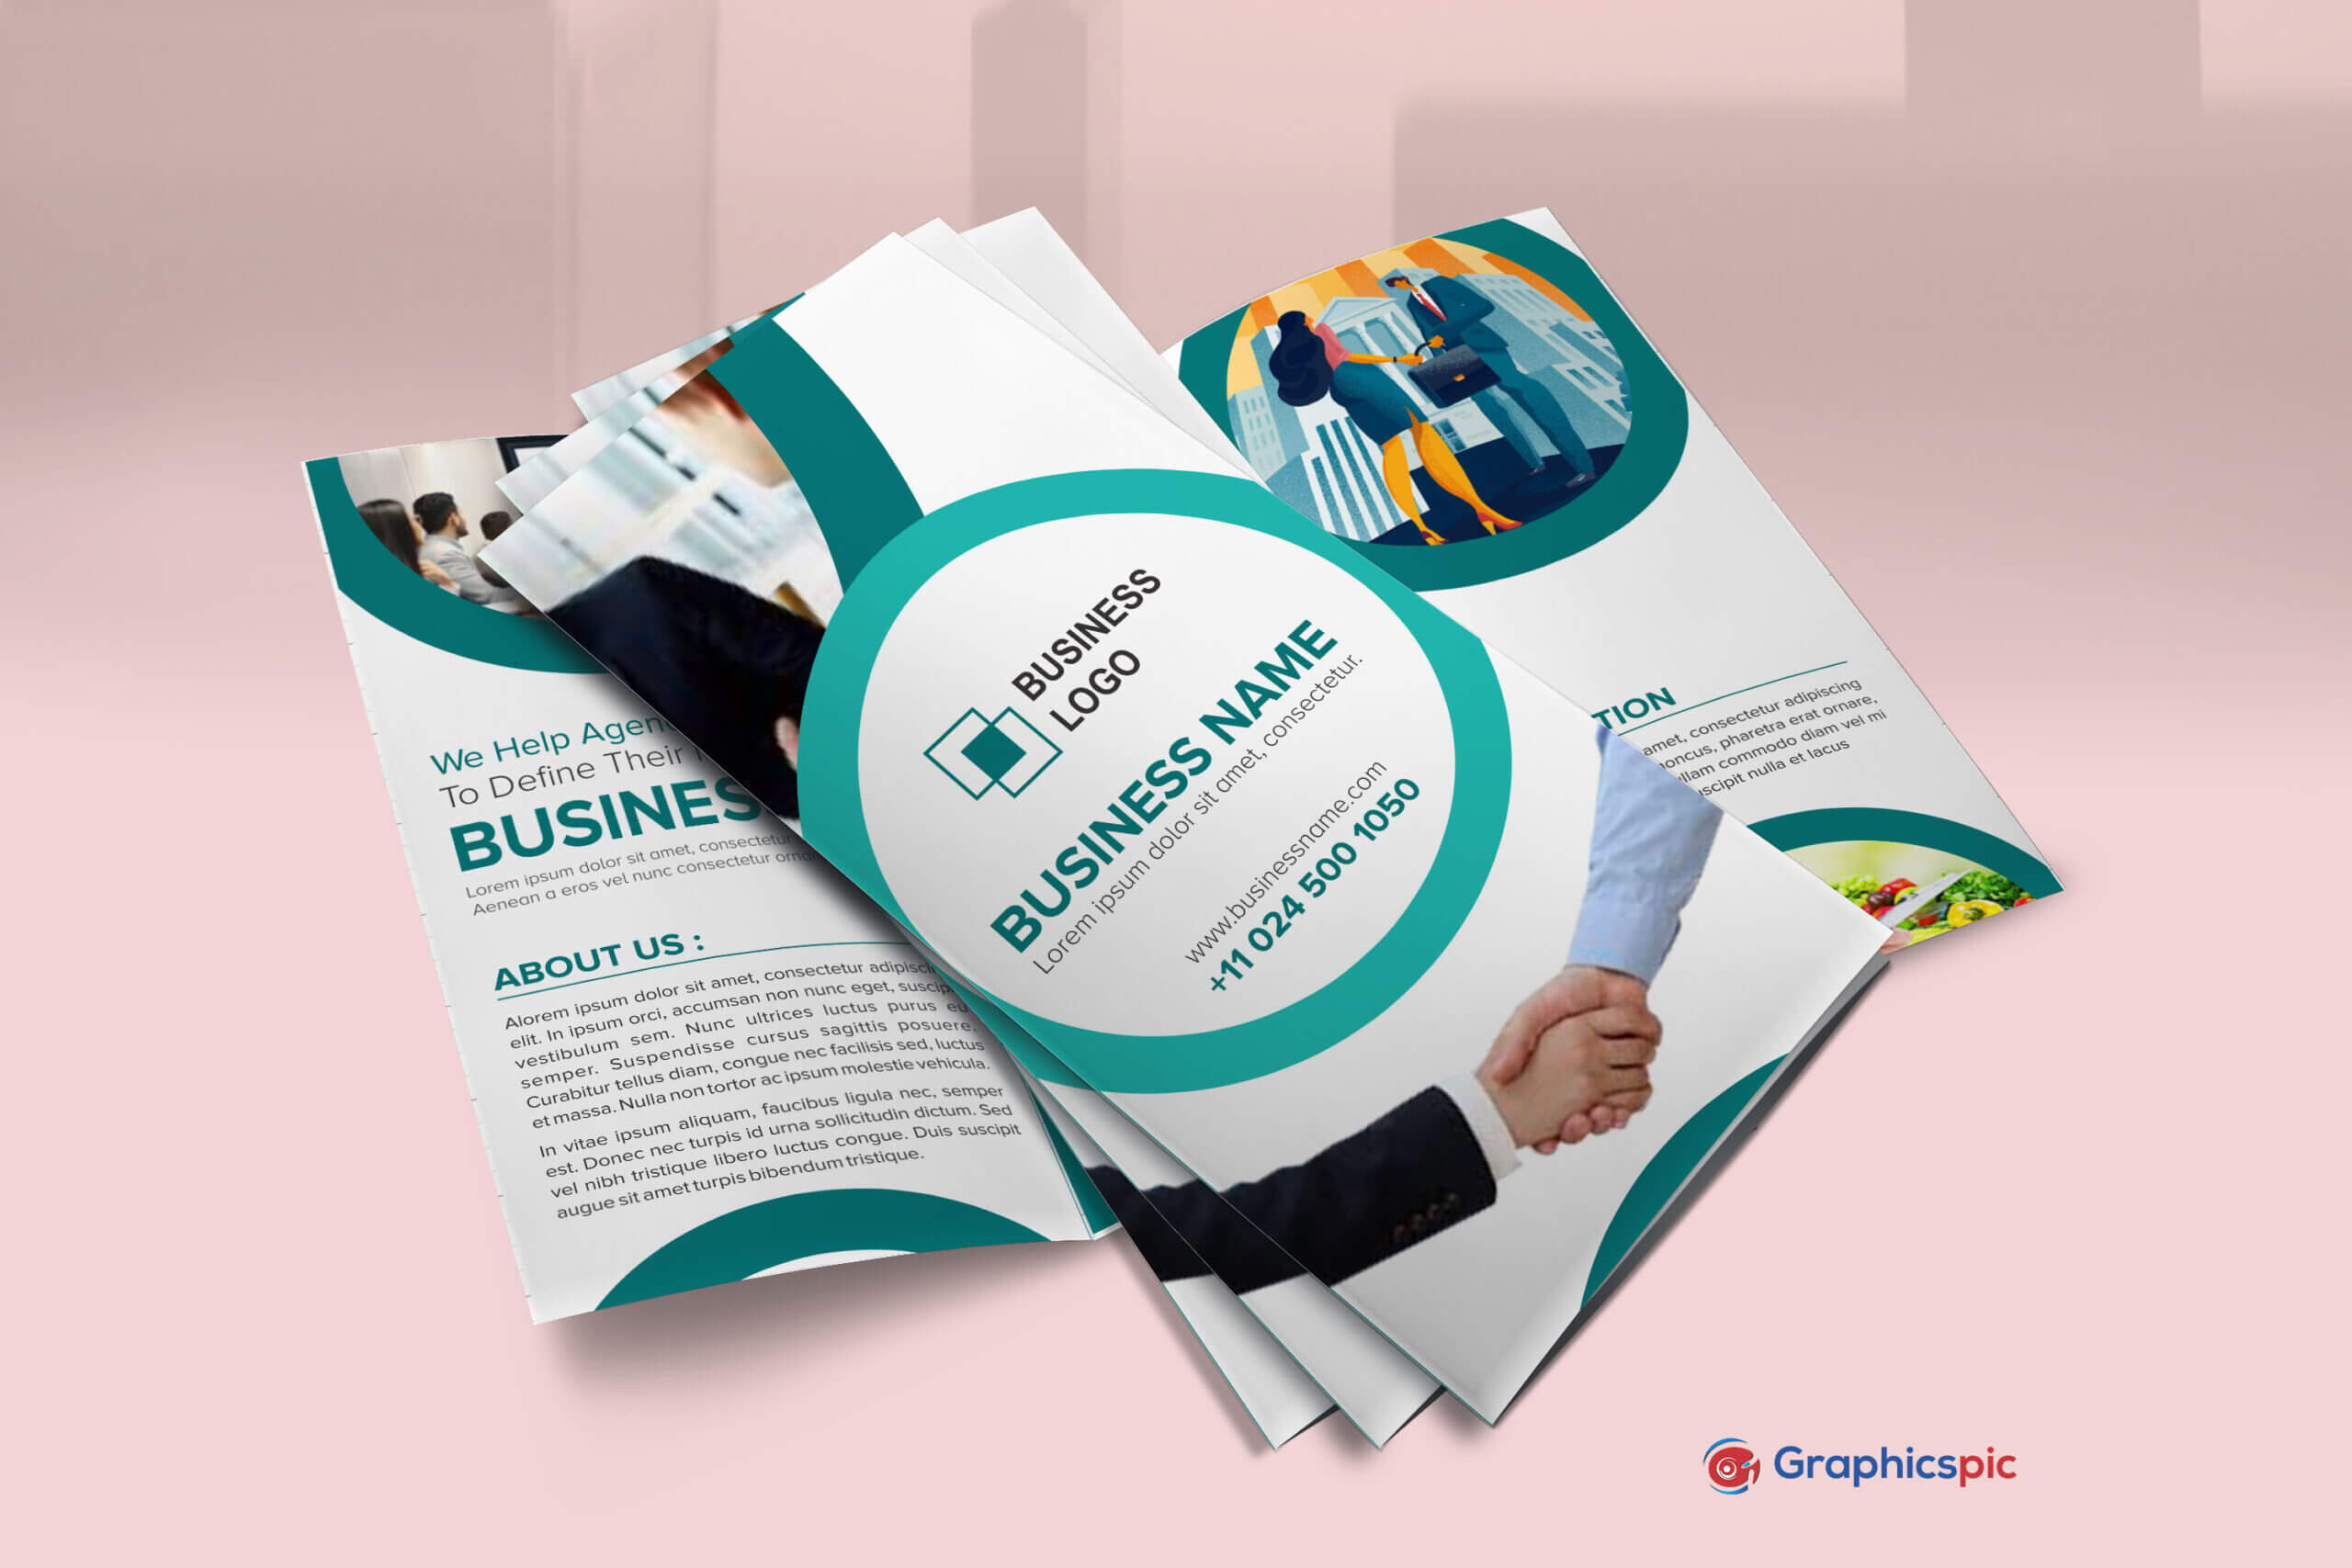 Free Download Brochure Templates Design For Events, Products Intended For Creative Brochure Templates Free Download